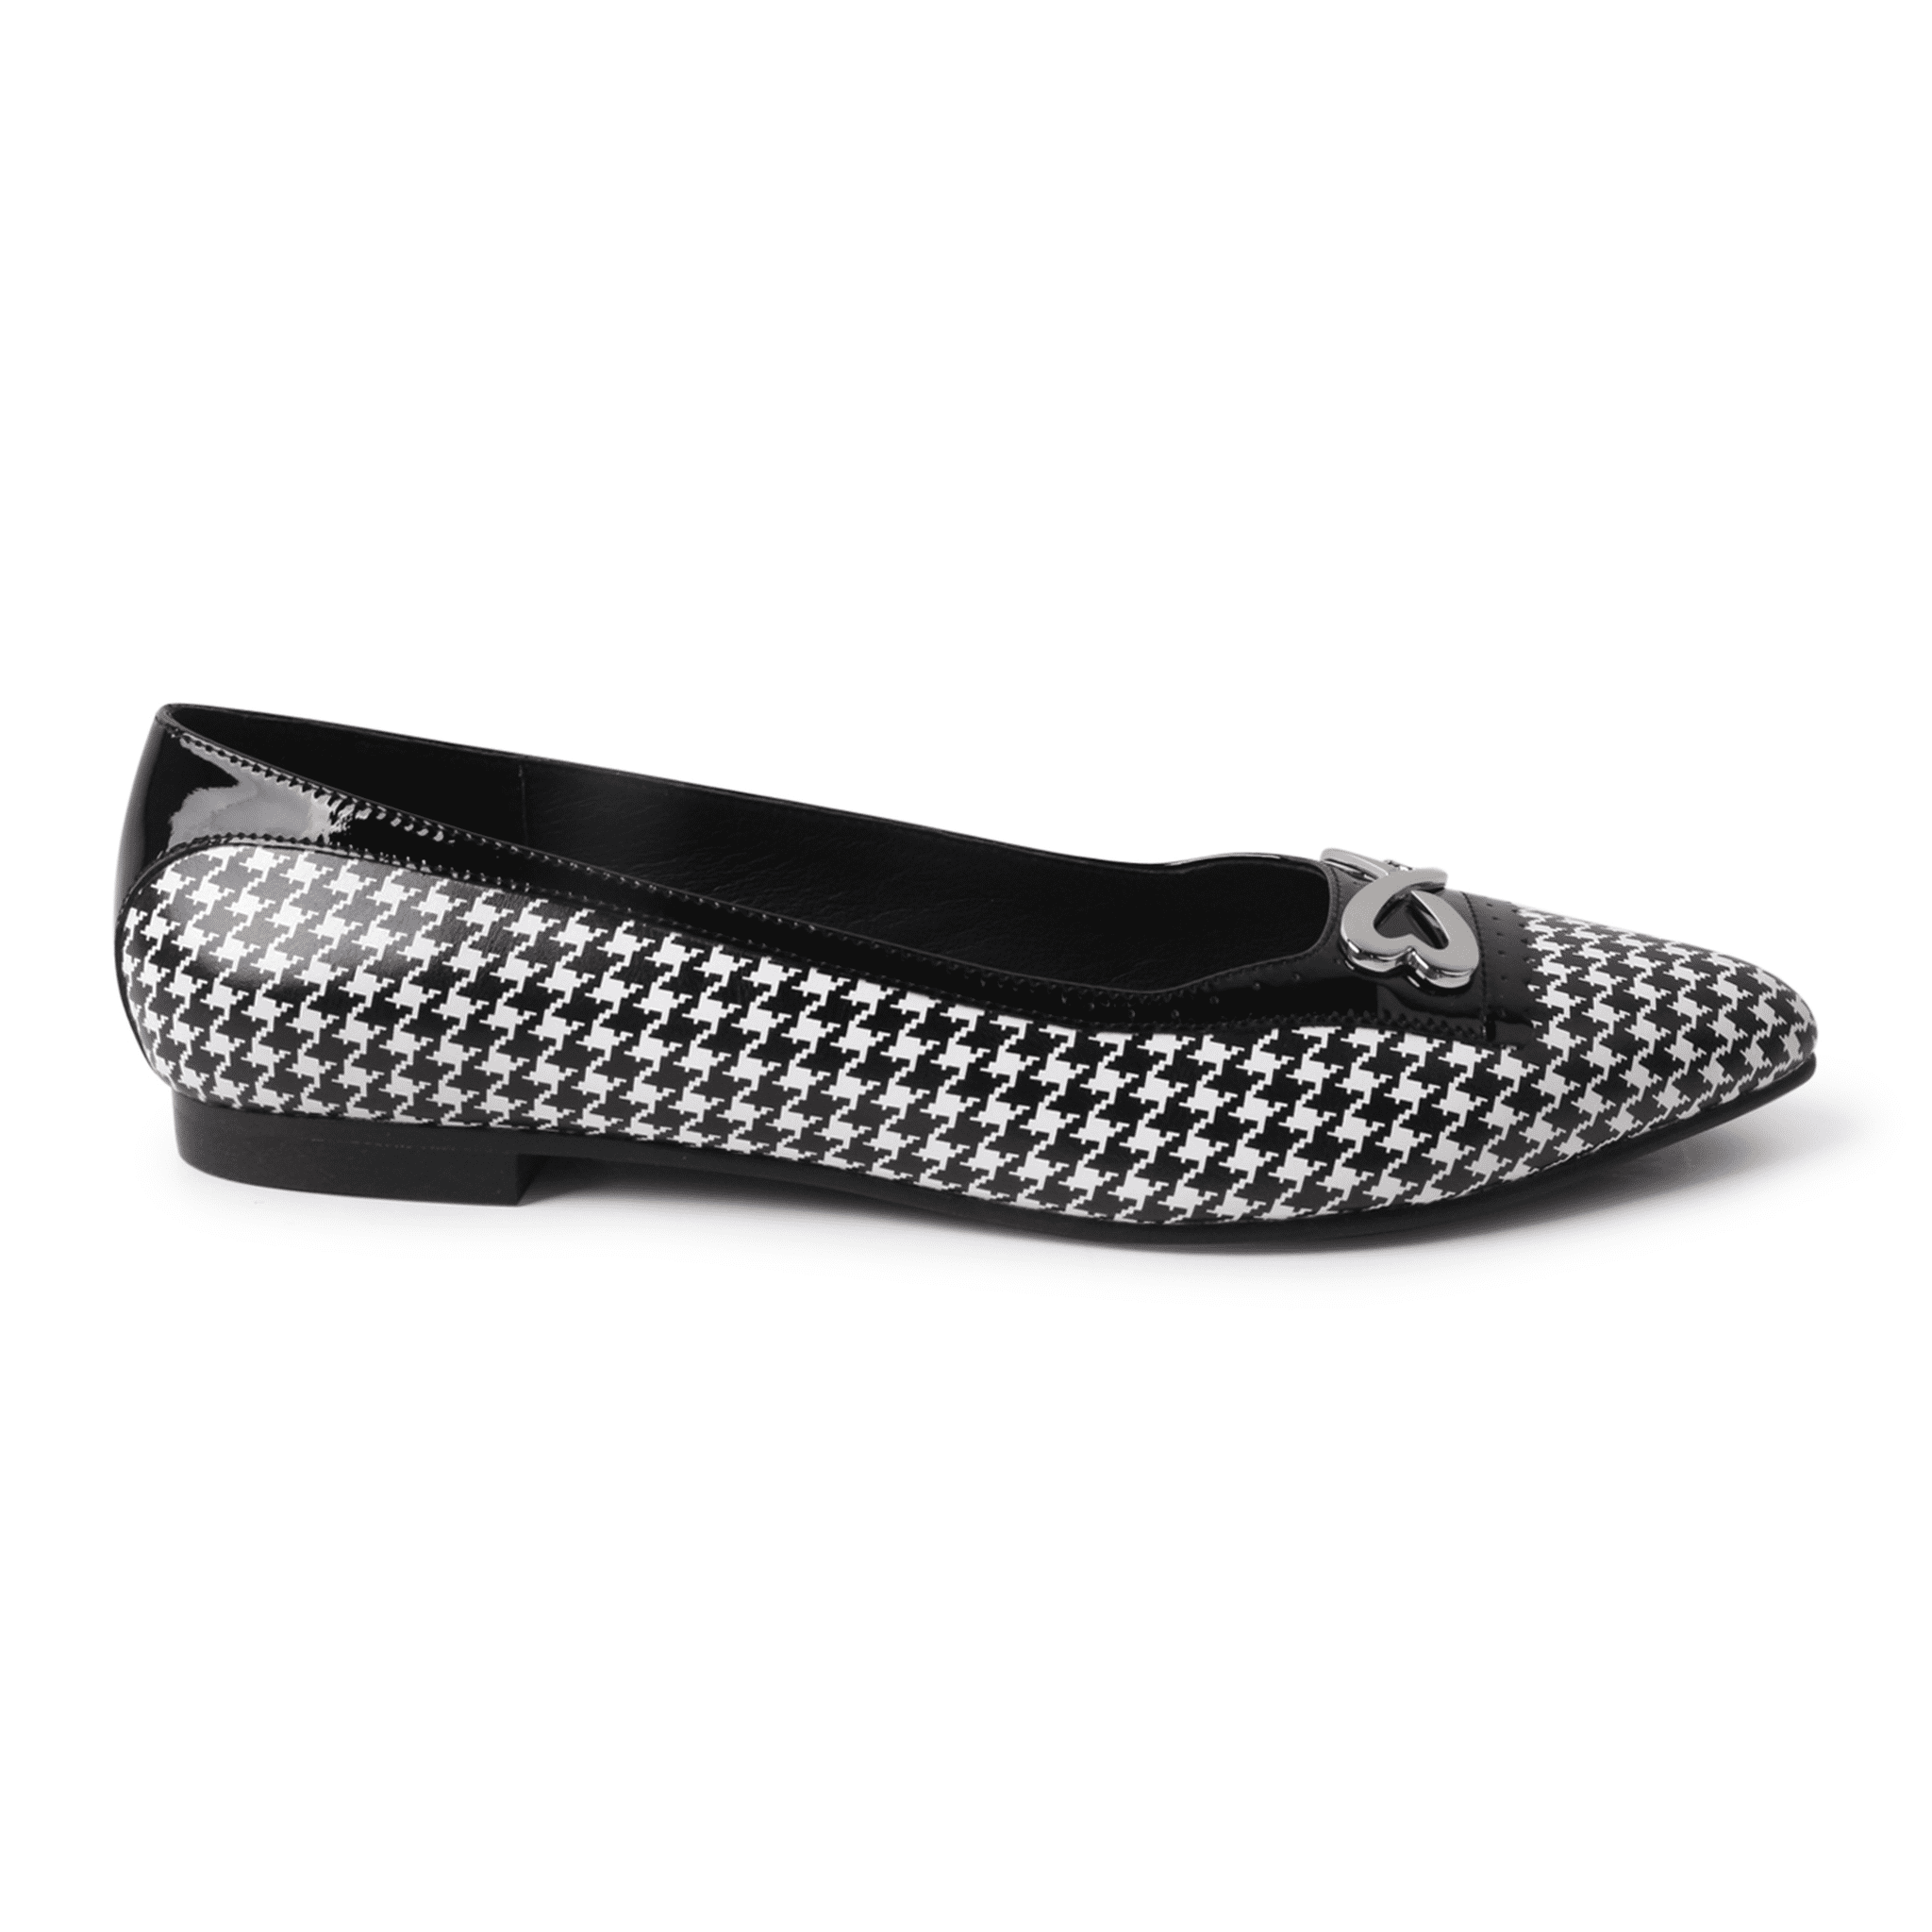 Houndstooth calf leather ballerina flat large sizes